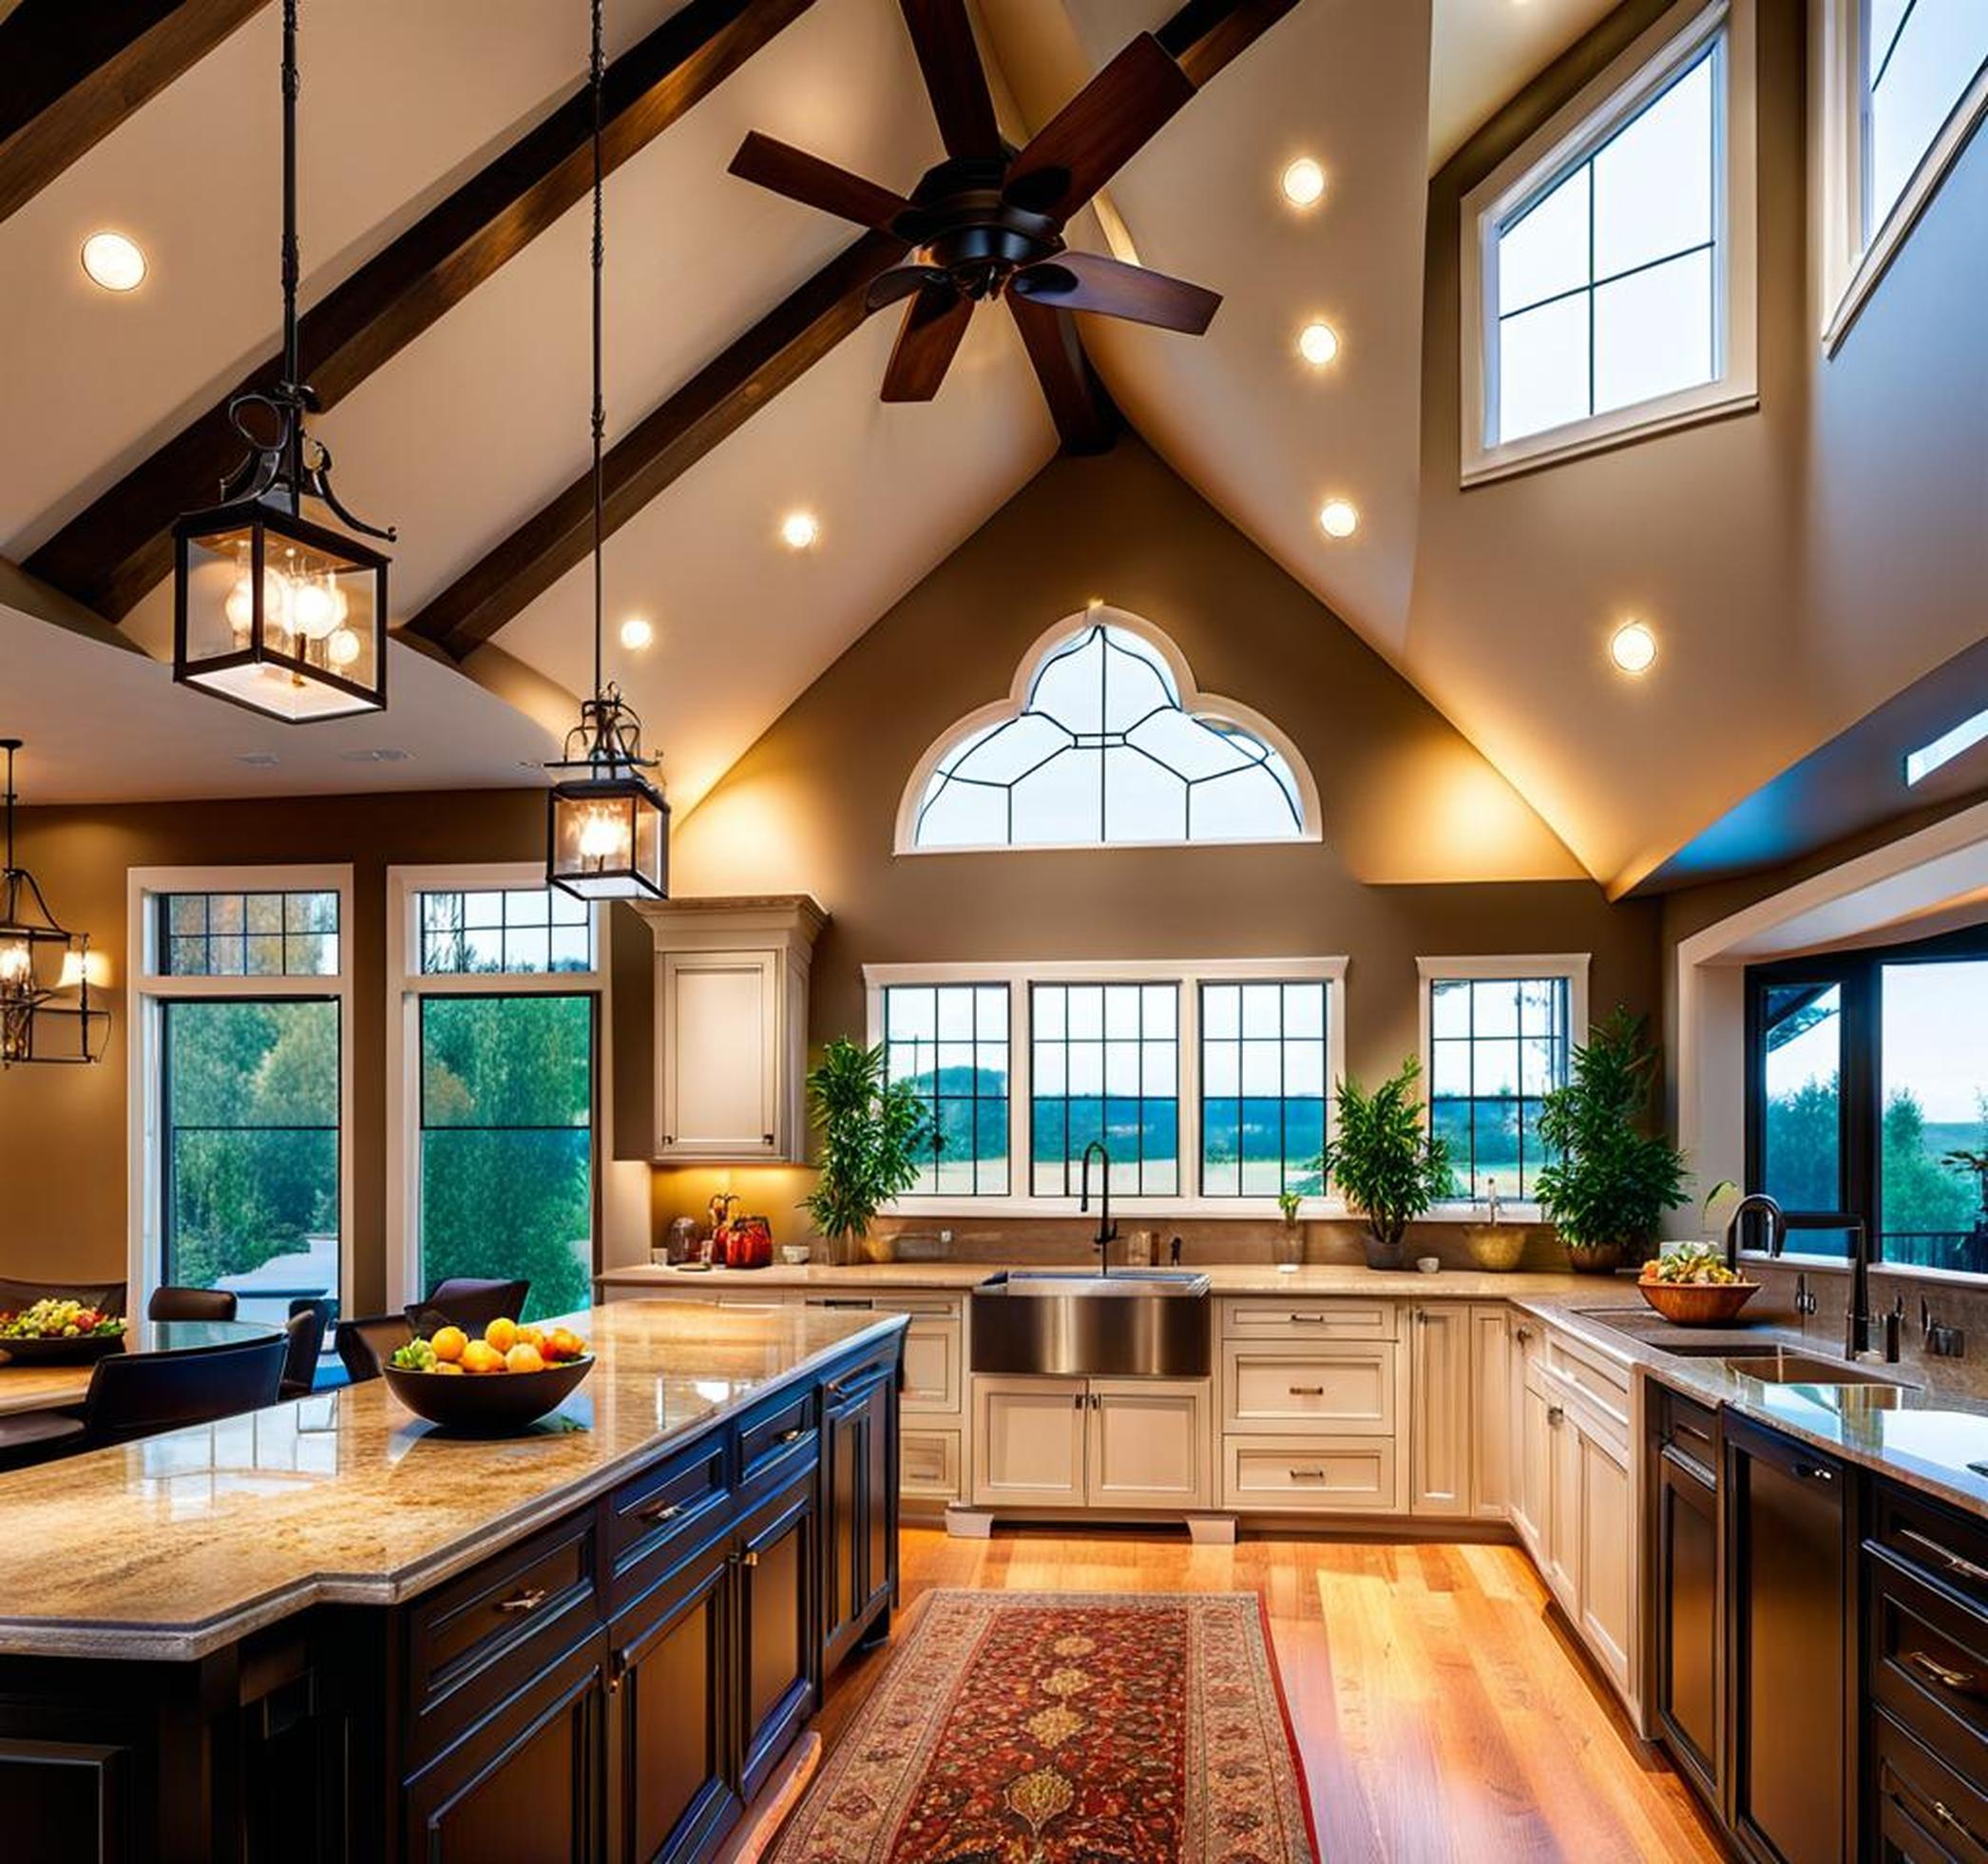 lighting in vaulted ceiling kitchen